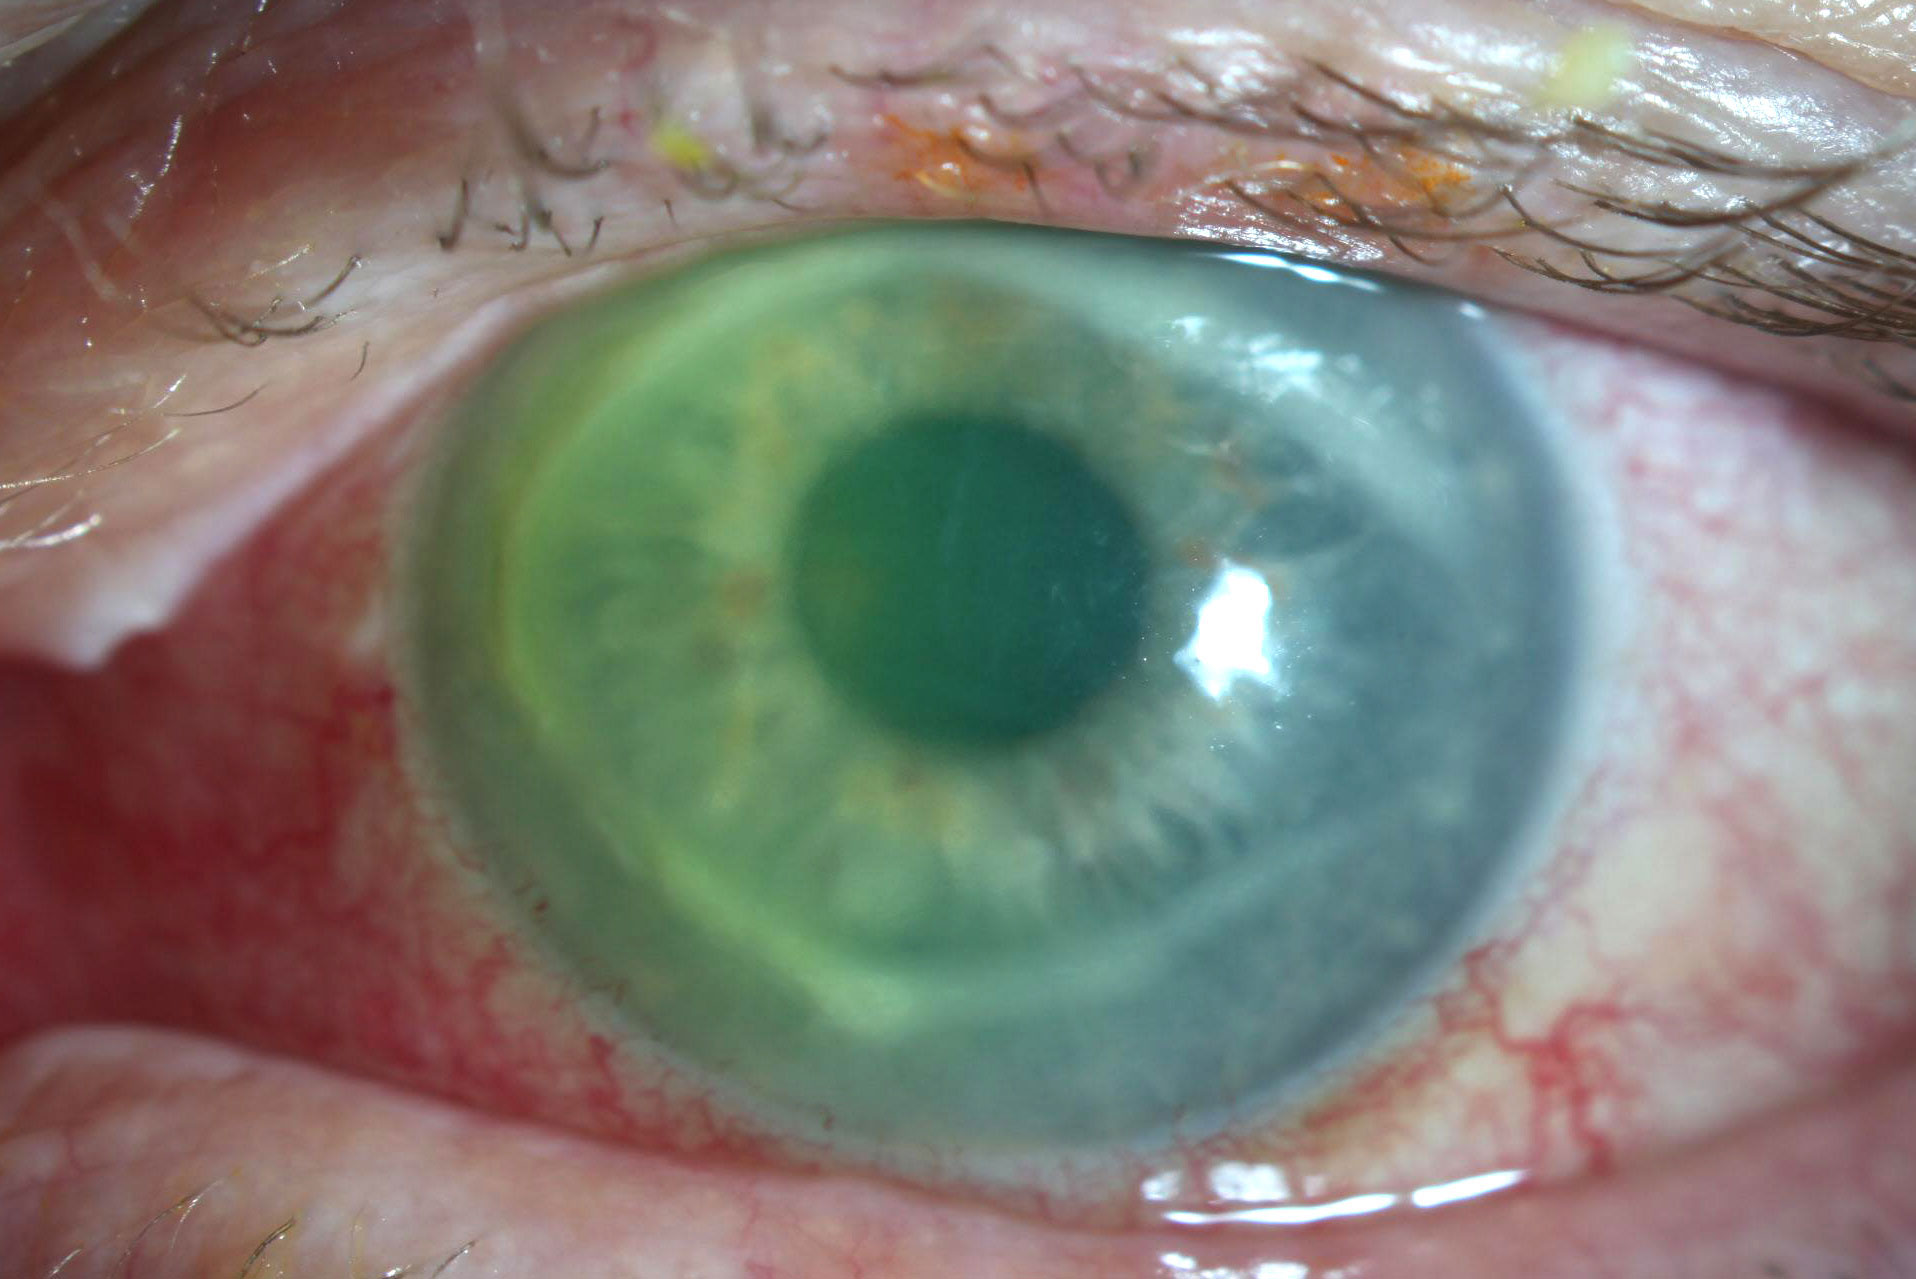 The patient’s eye at presentation shows 2+ to 3+ injection, a dense apical ring and central stromal edema.